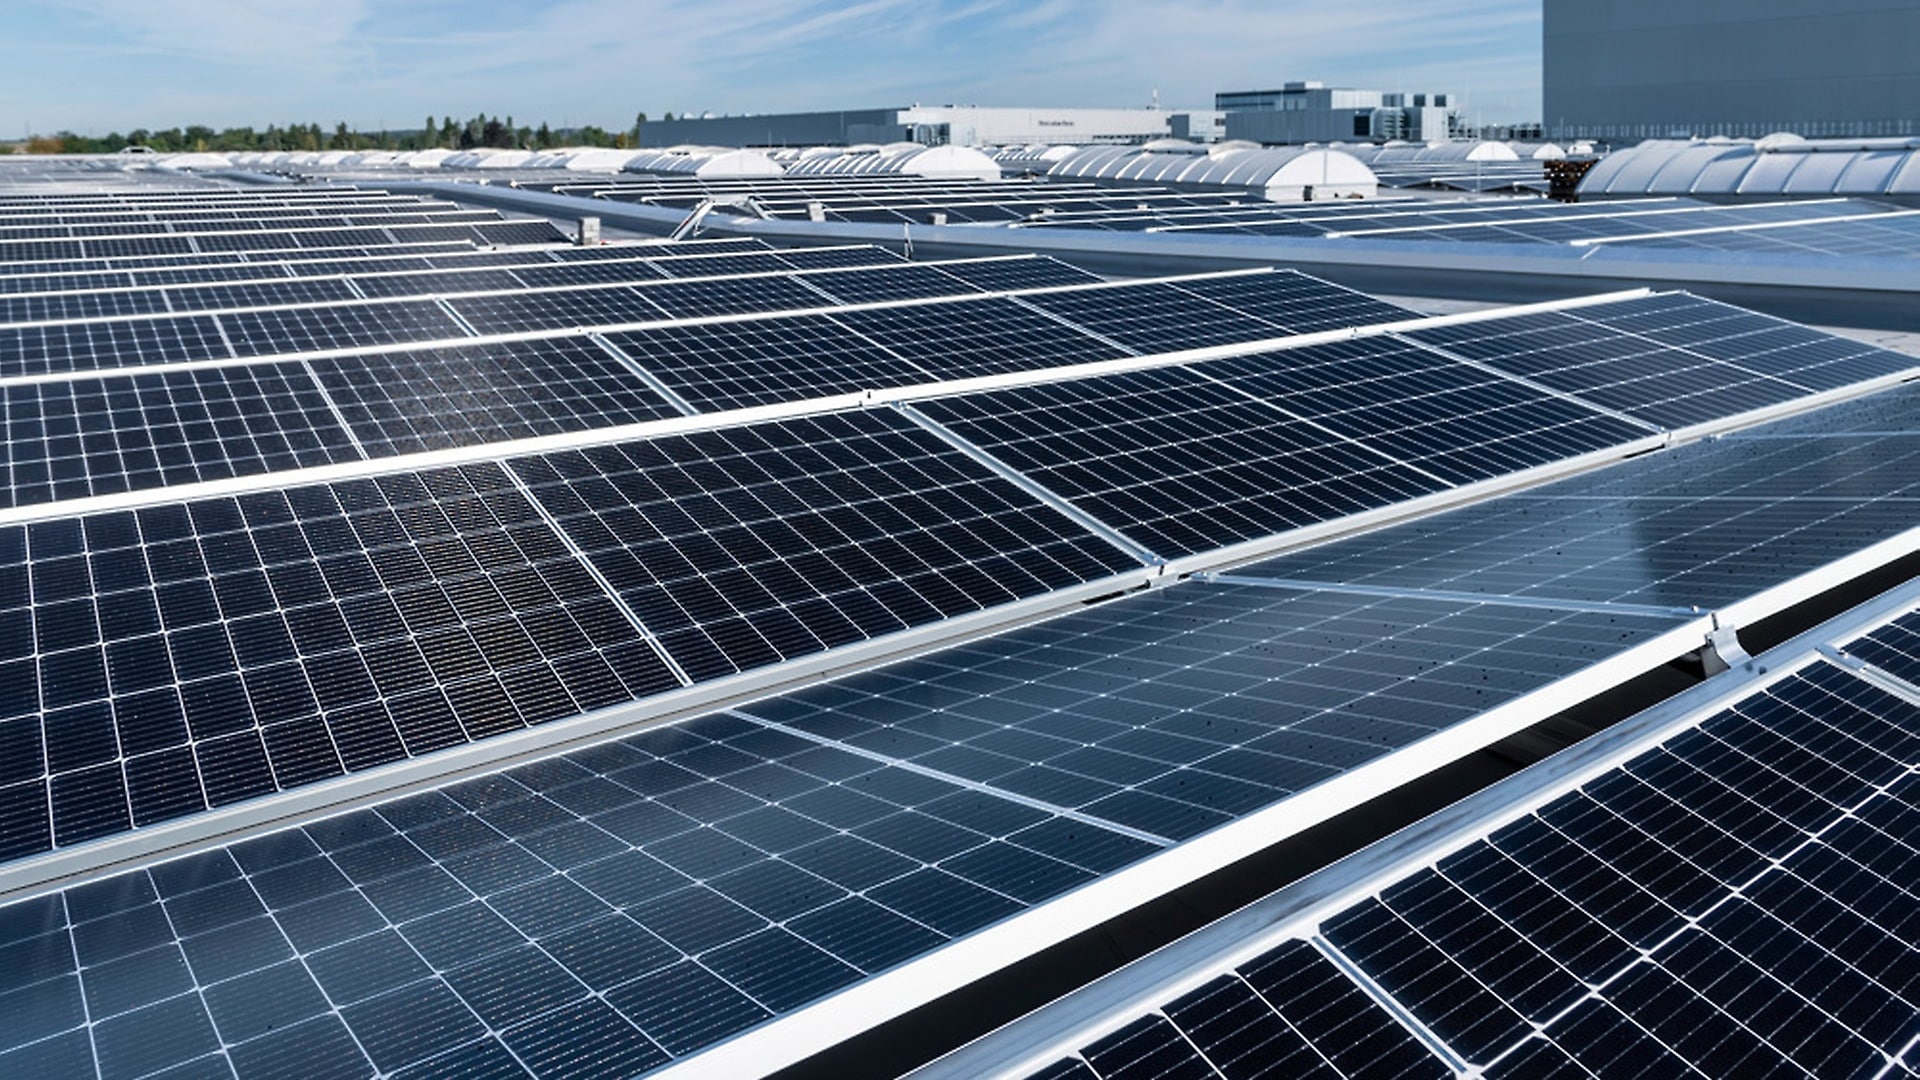 On the roof of Factory 56 is a photovoltaic system which supplies the shop with self-generated, green electric power. 